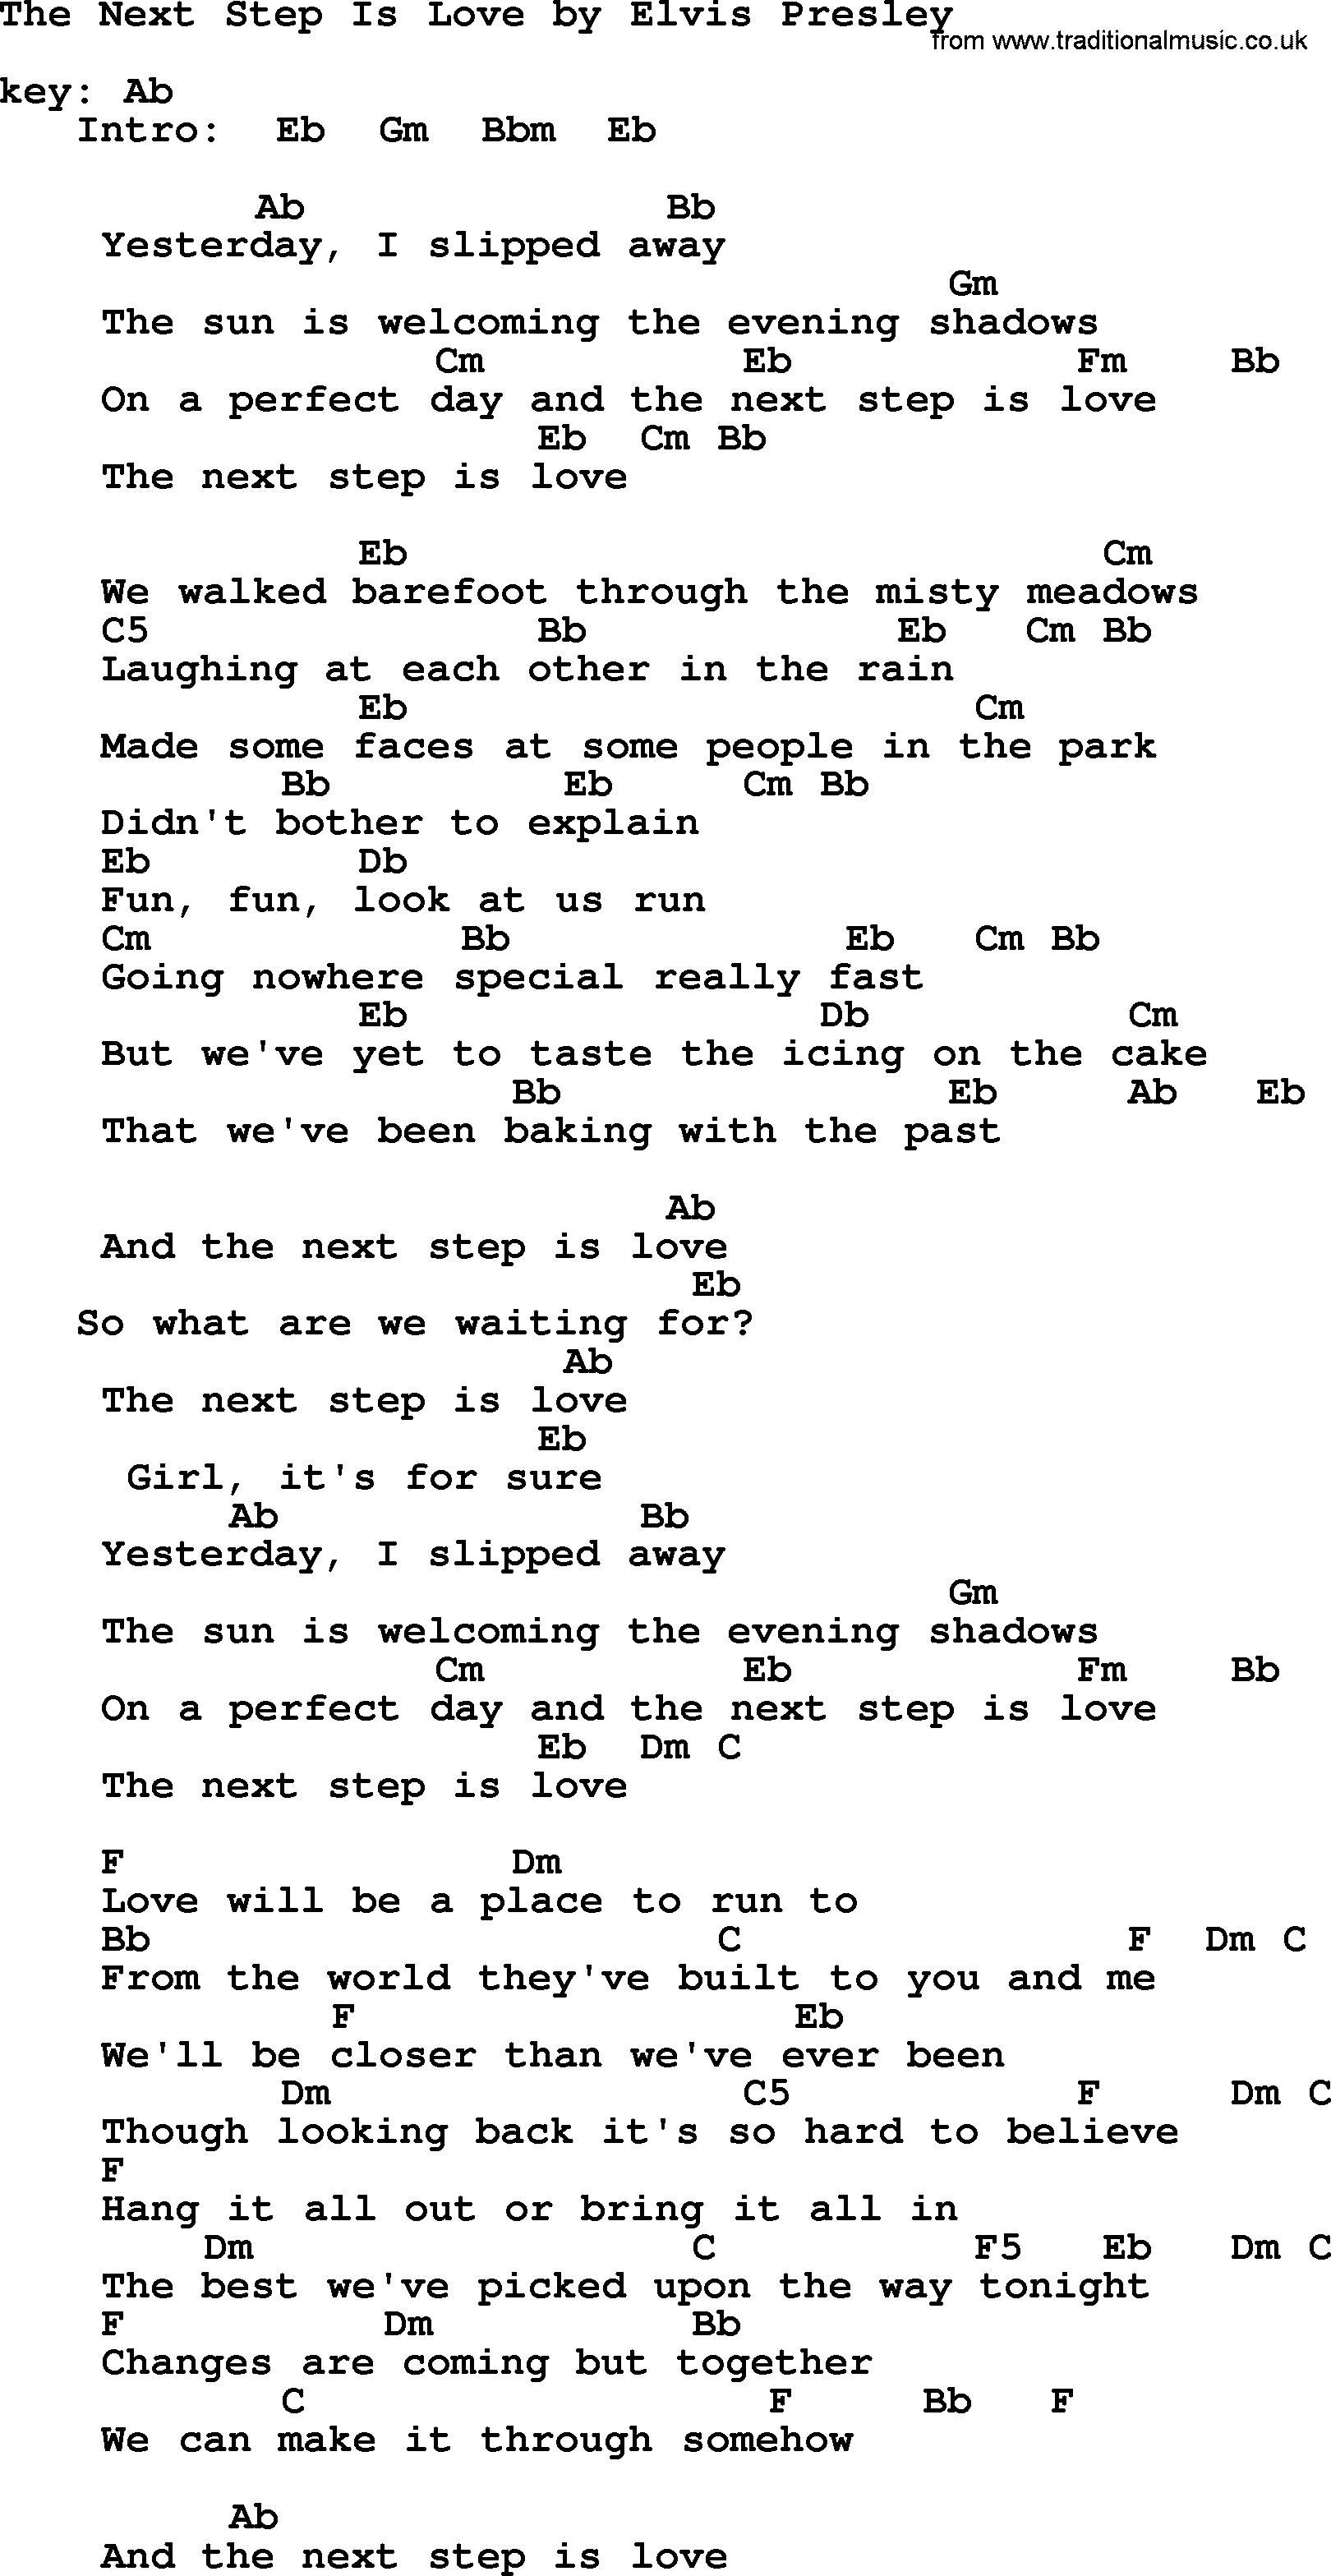 Elvis Presley song: The Next Step Is Love, lyrics and chords